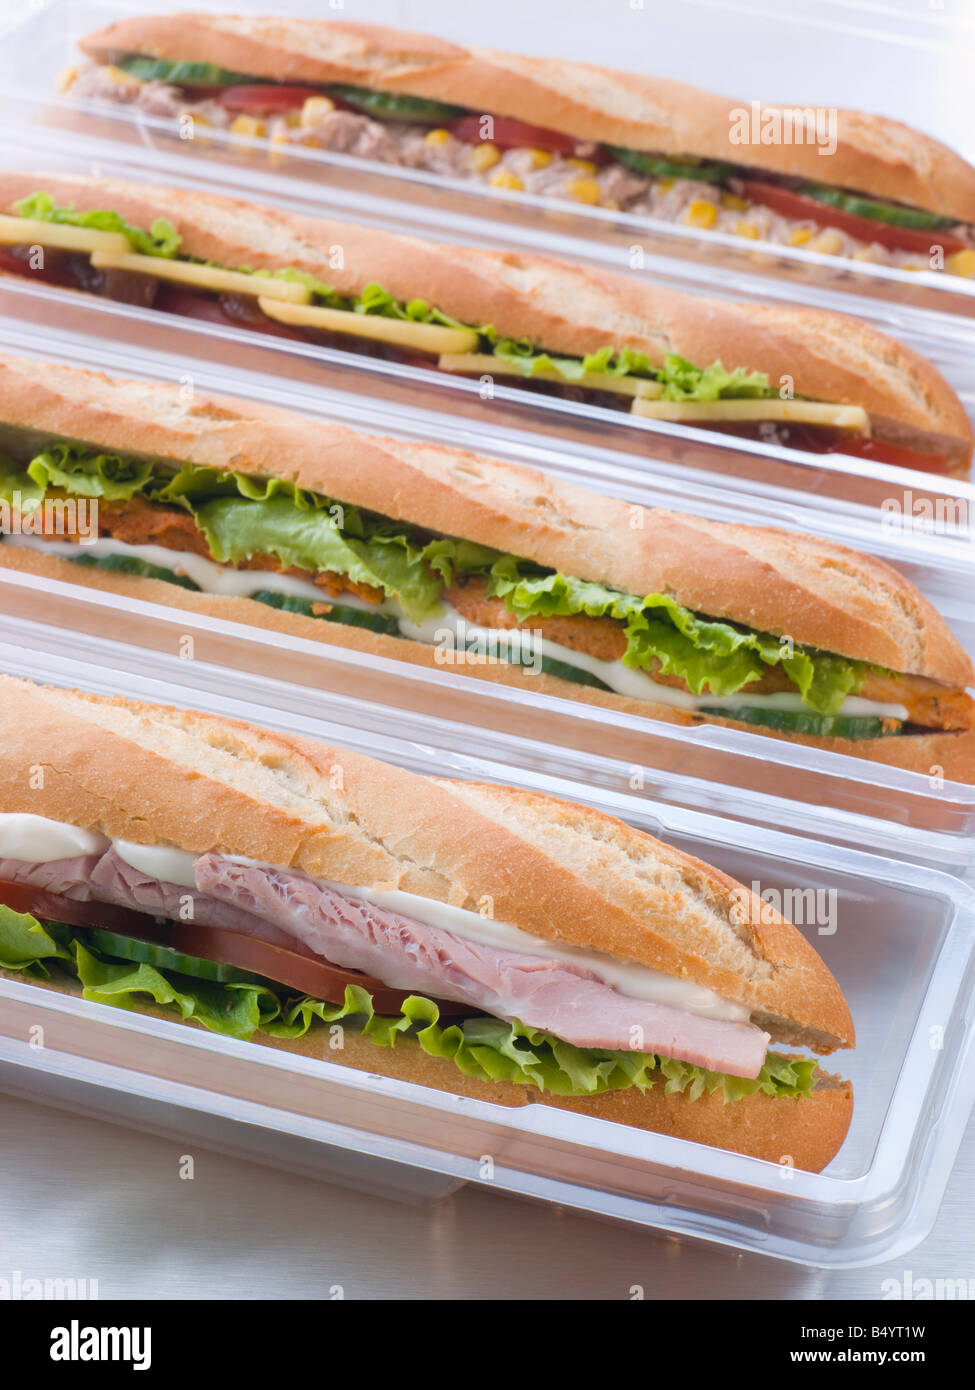 Selection Of Baguettes In Plastic Packaging Stock Photo